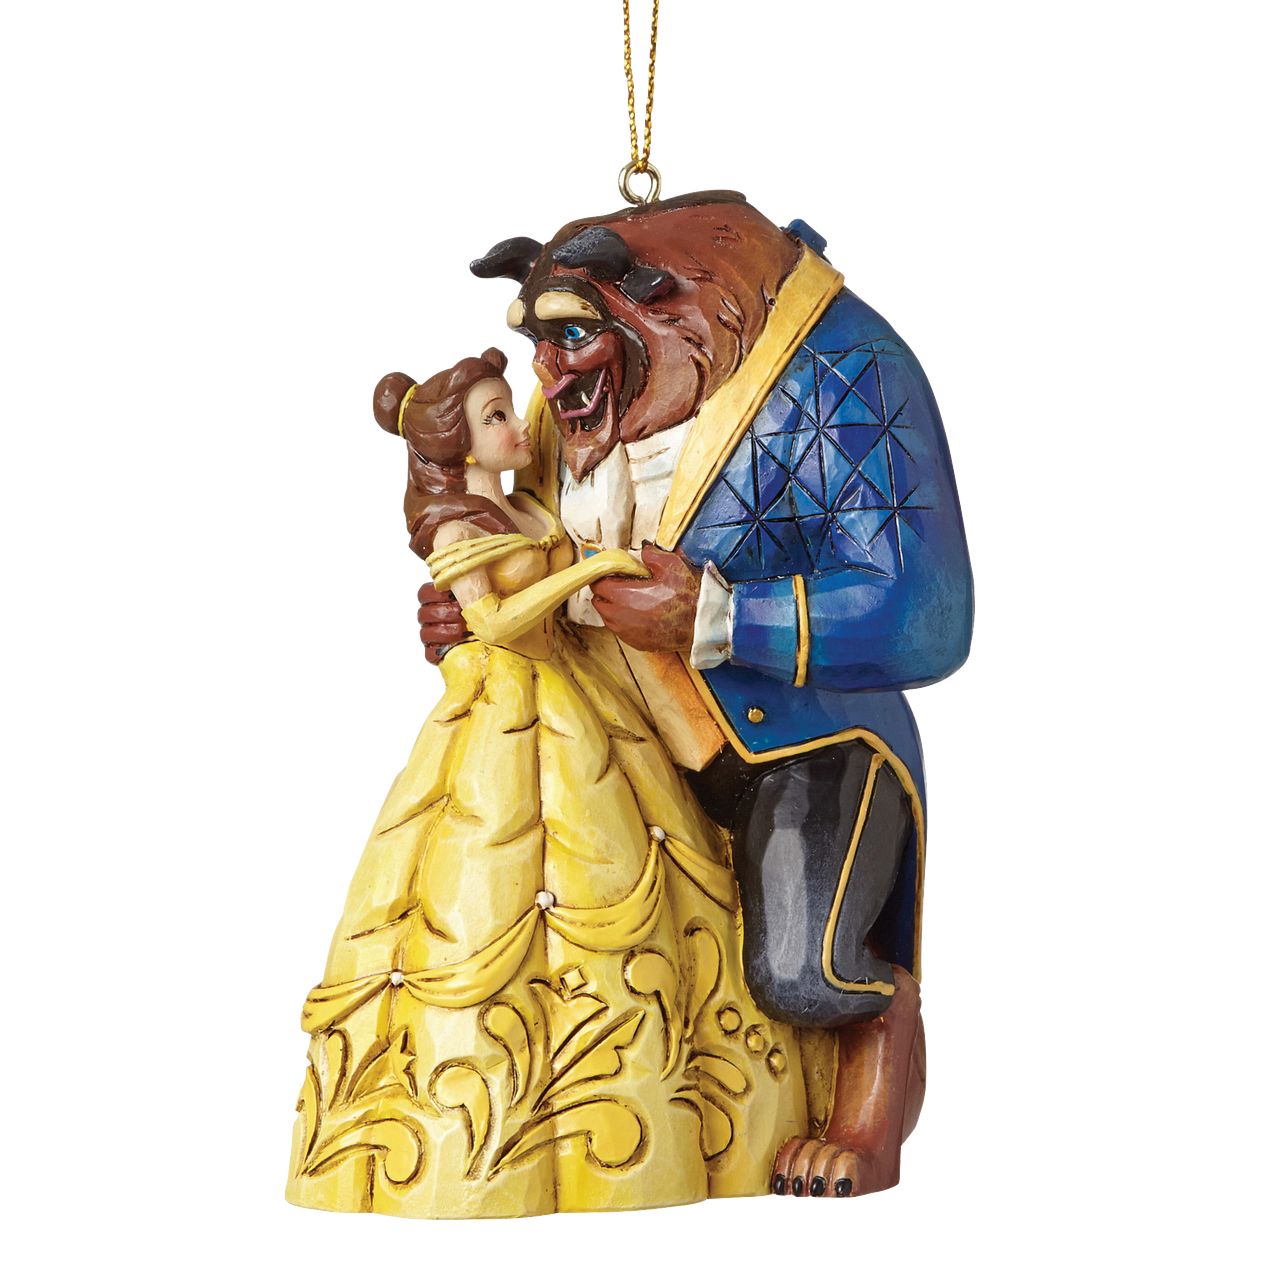 Disney Beauty and The Beast Hanging Ornament  This Beauty & The Beast cast stone hanging ornament is sure to add Disney's magic and romance to your Christmas tree. Bestseller.